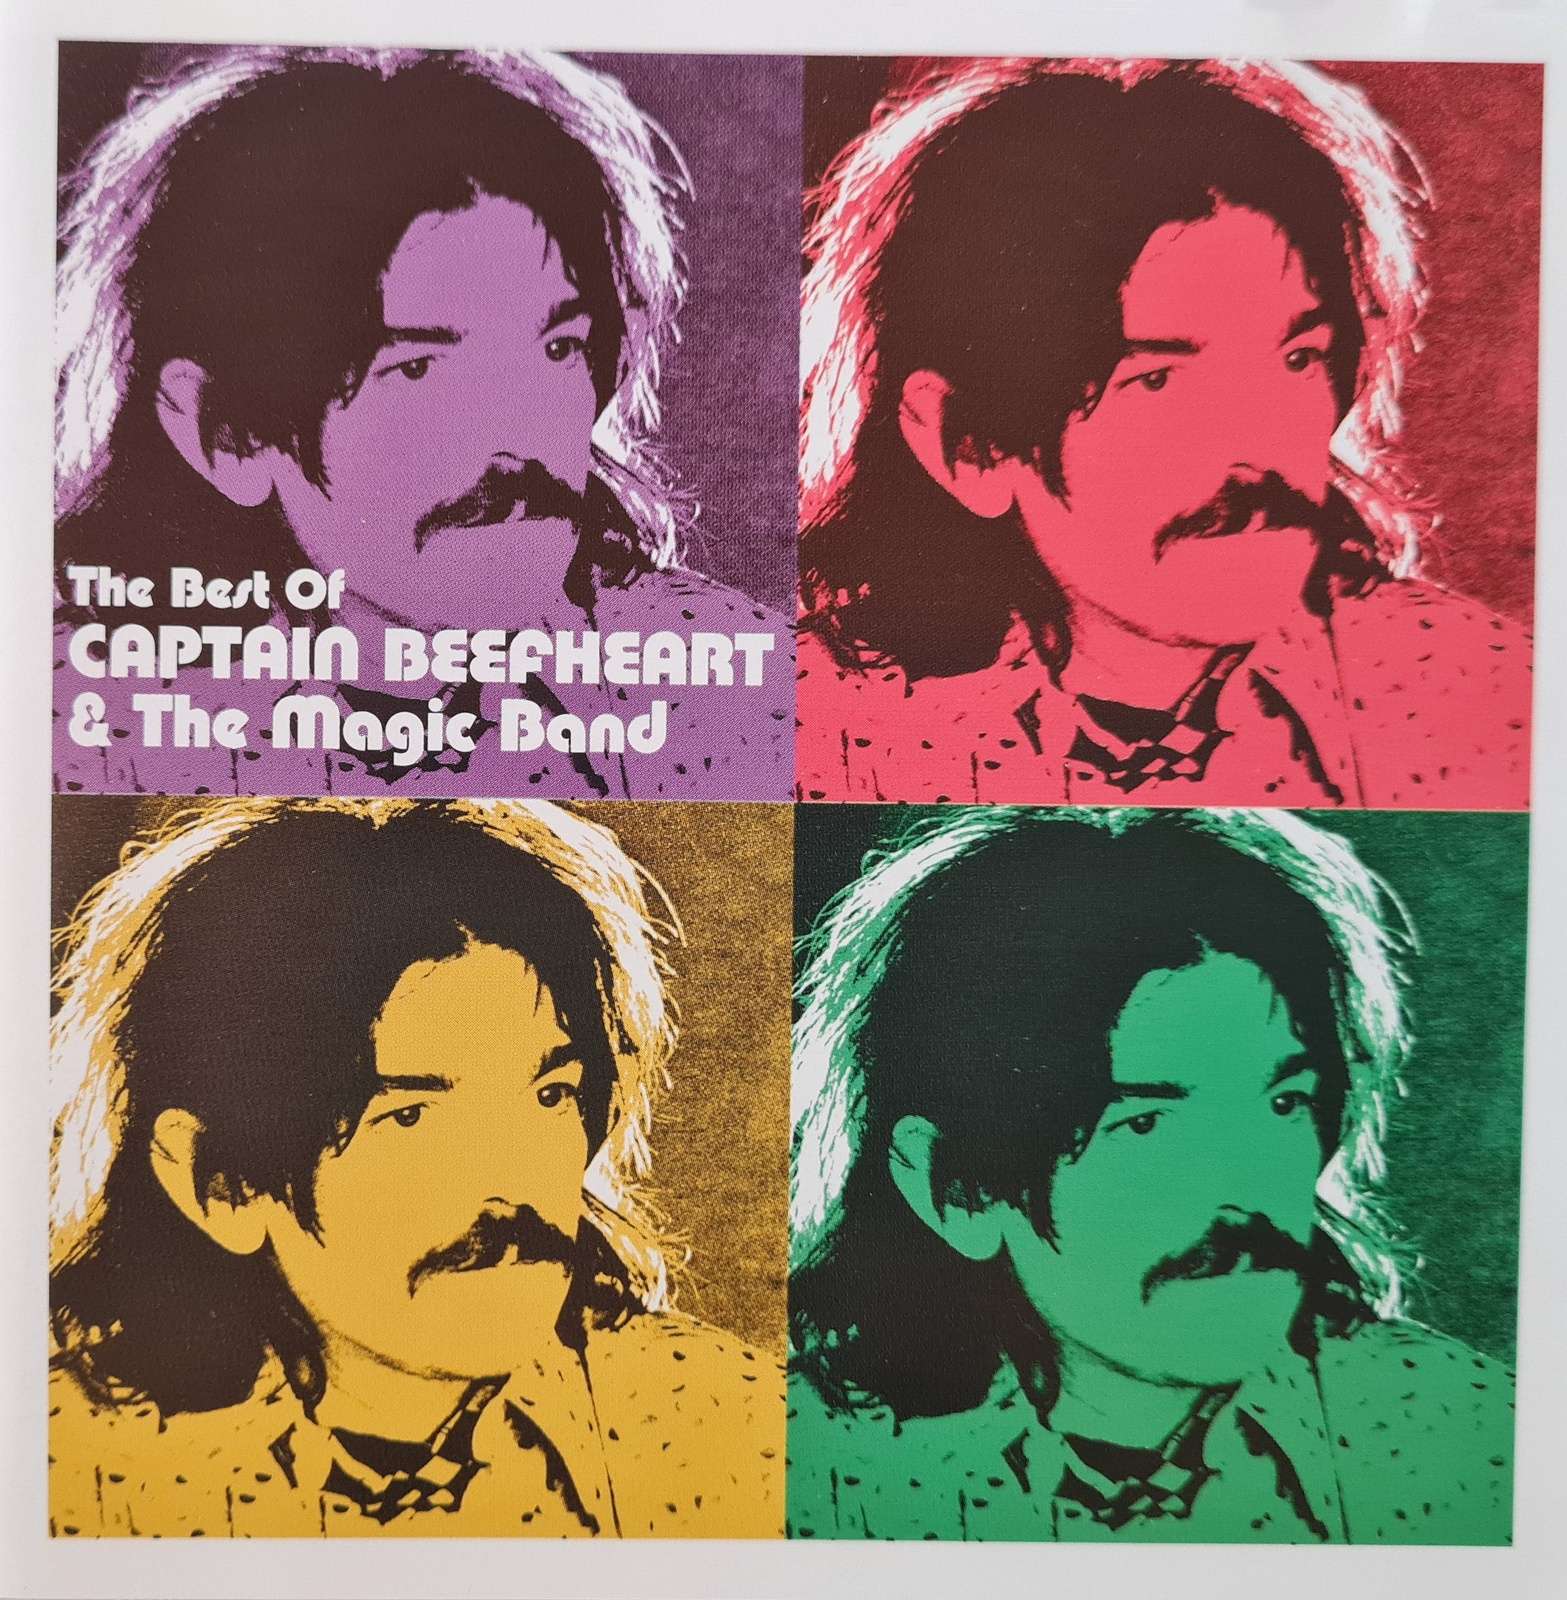 Captain Beefheart & The Magic Band - The Best of (CD)